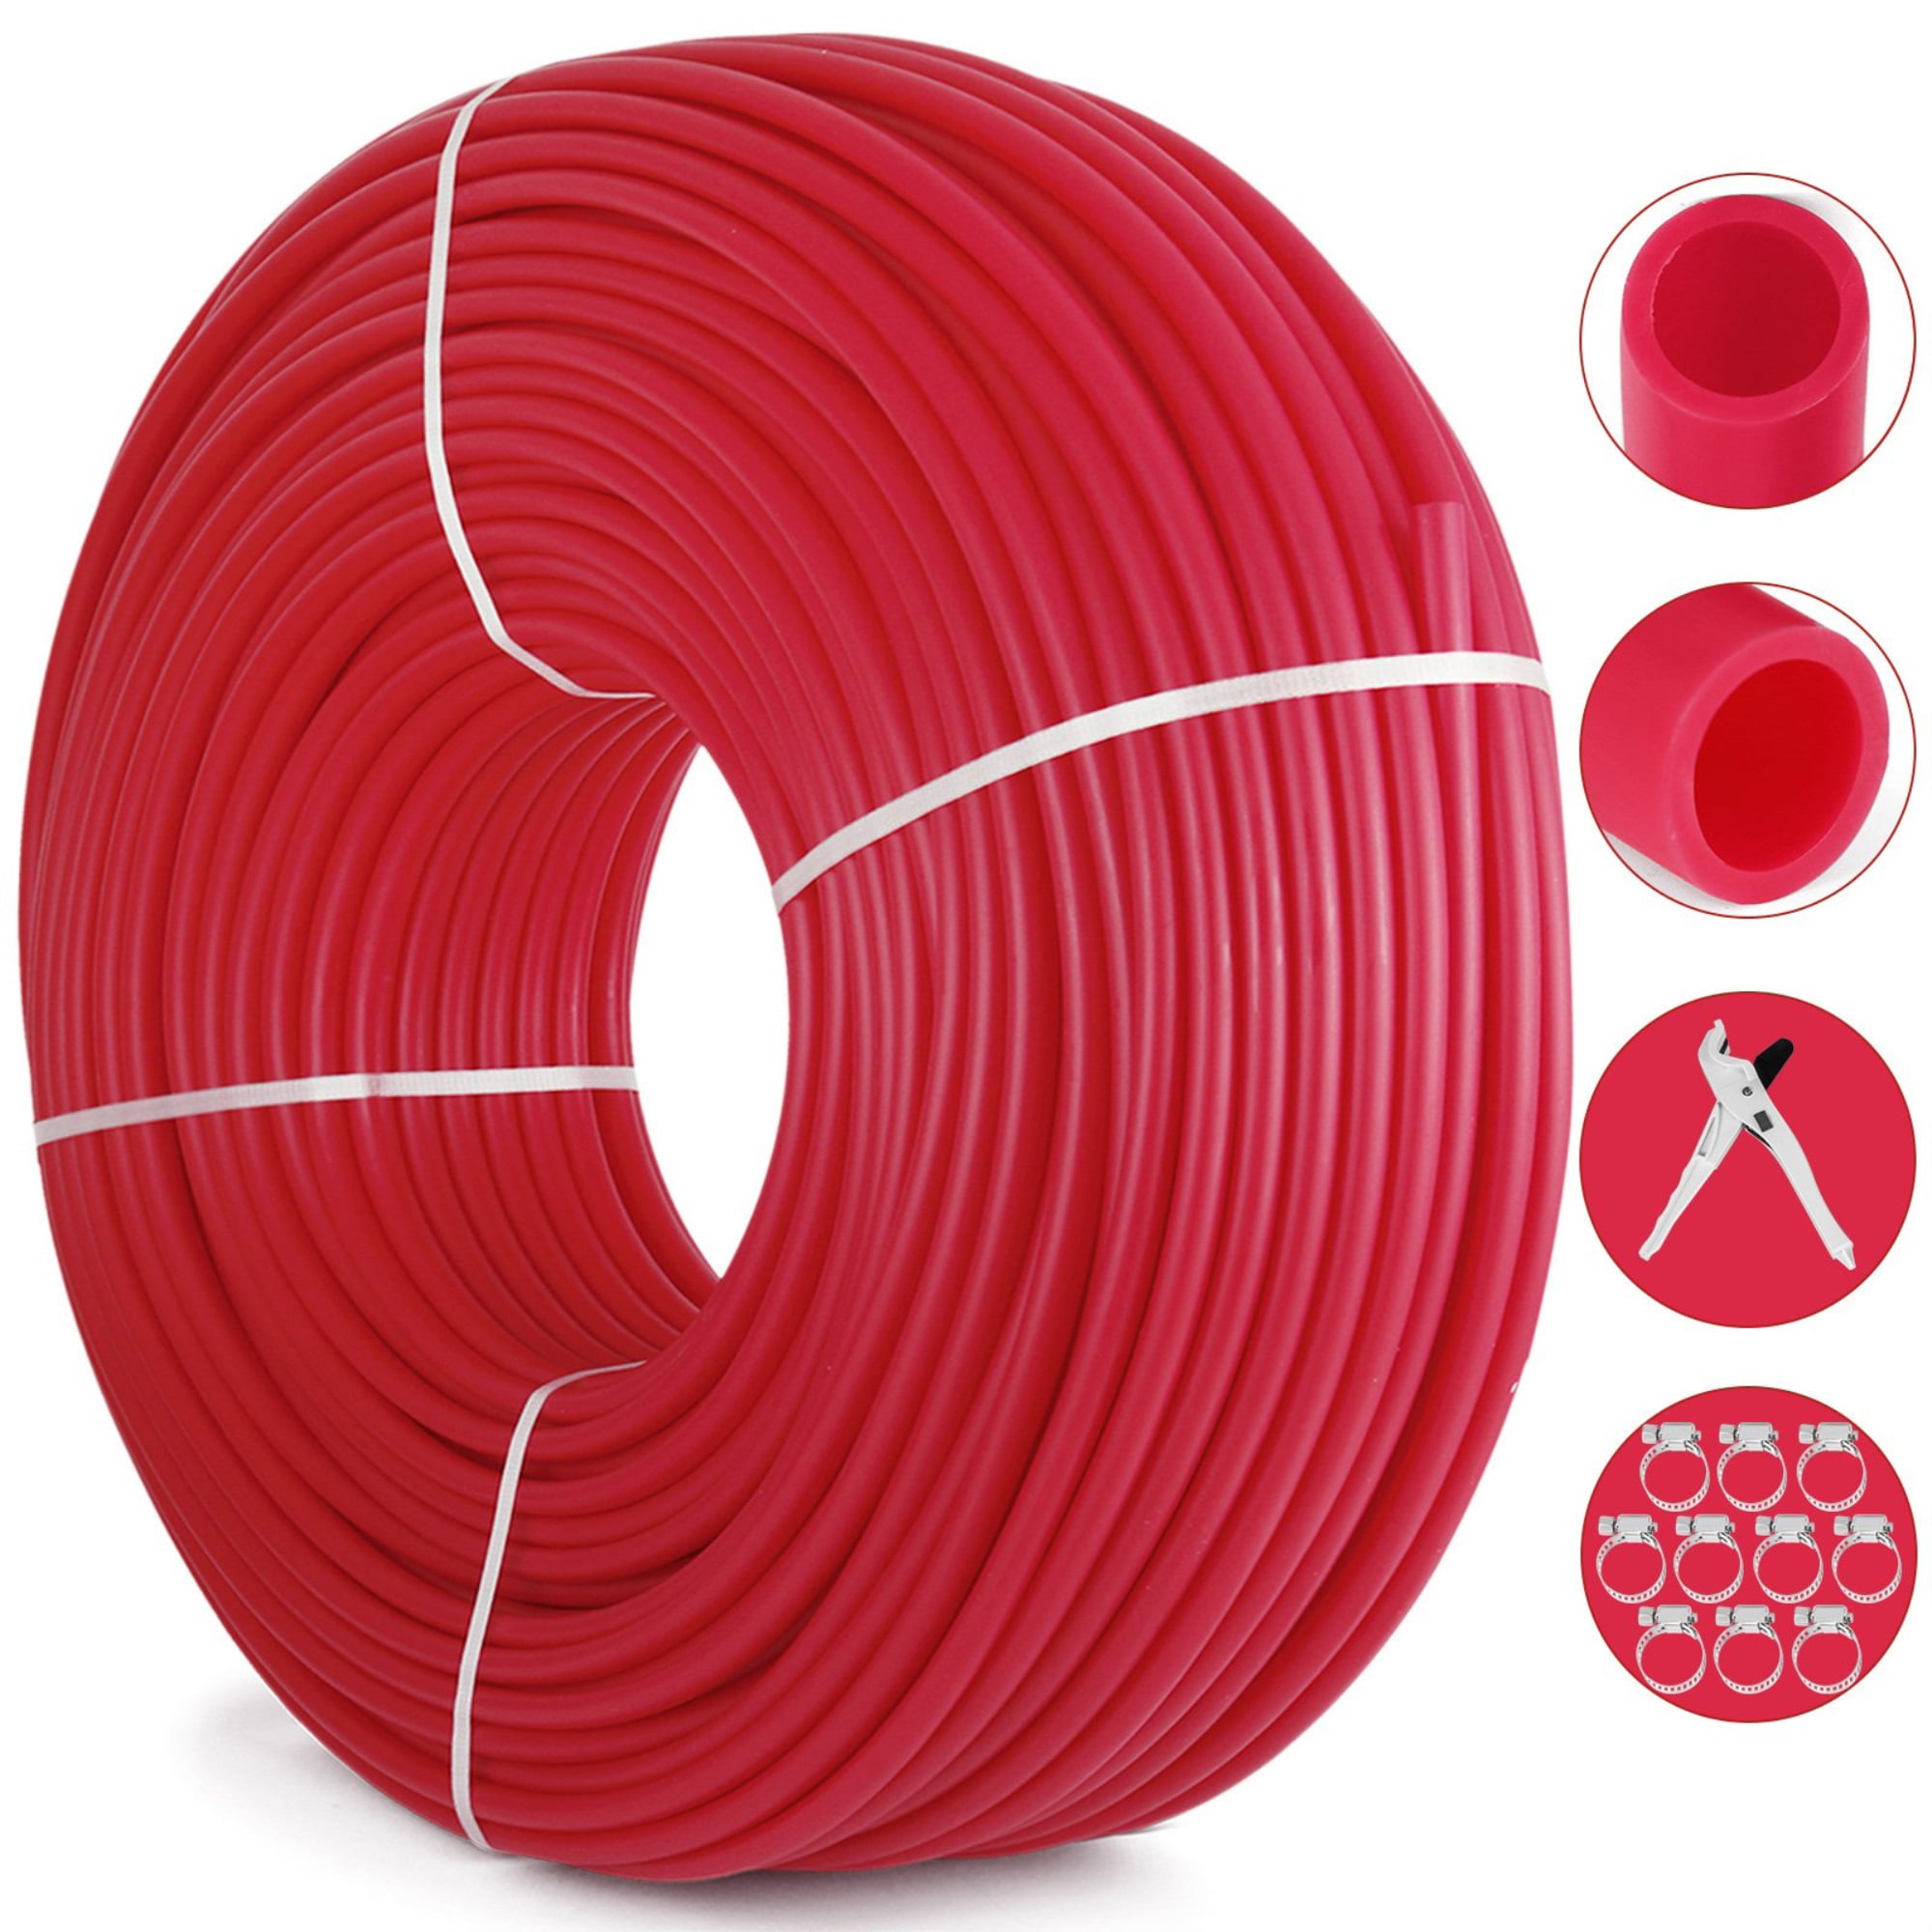 EVOH PEX-B Pipe for Residential Commercial Radiant Floor Heating Pex Pipe 1/2 O2-Barrier, 900Ft/Red 1/2 Inch X 900 Feet Tube Coil Happybuy Oxygen Barrier PEX Tubing